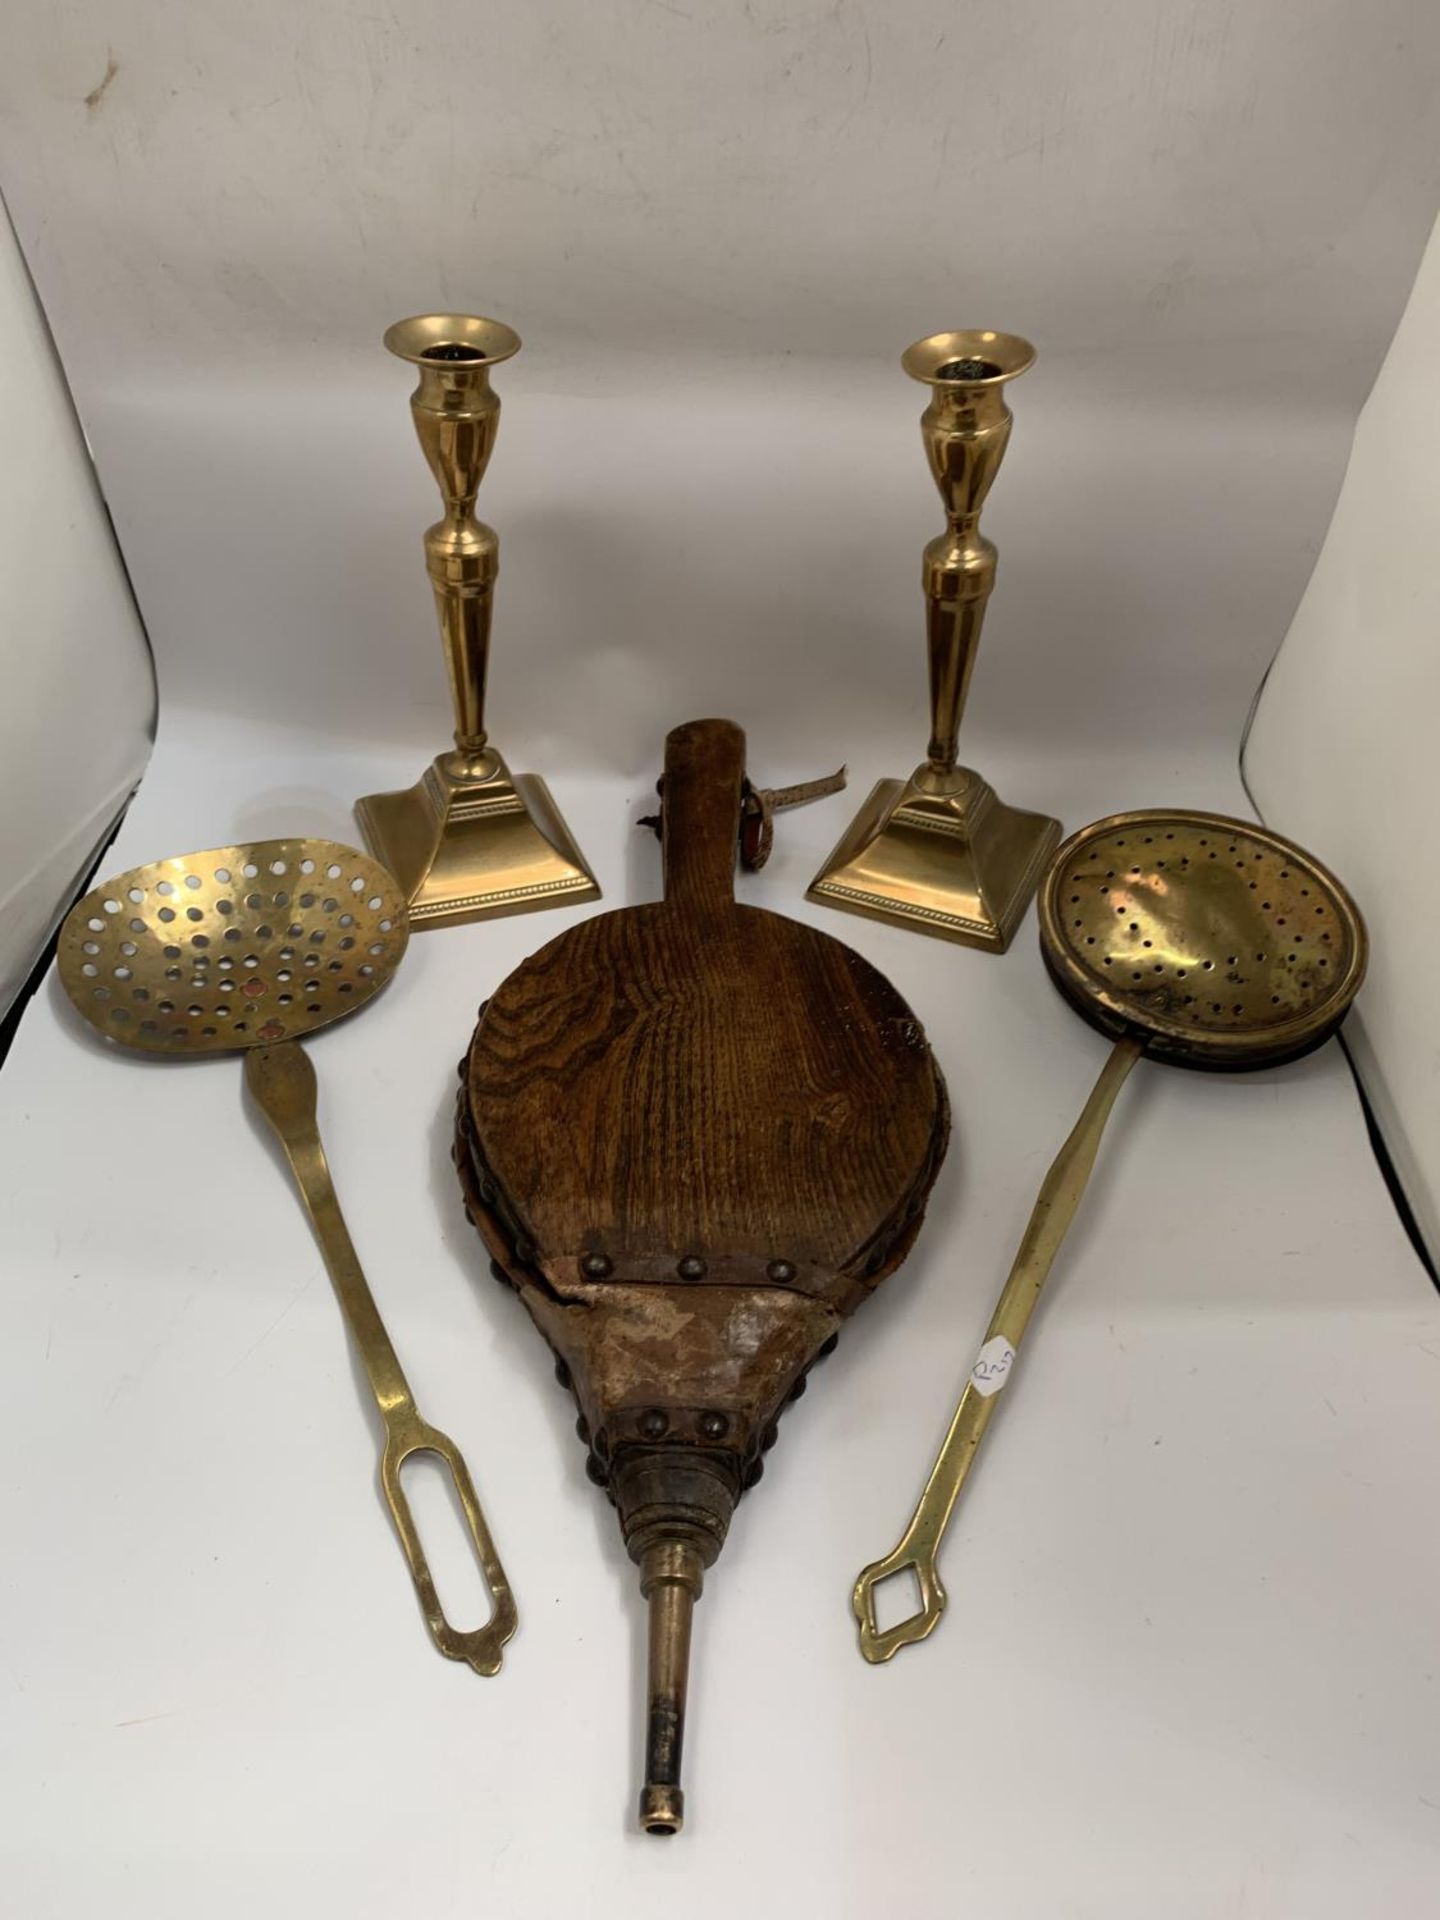 A QUANTITY OF VINTAGE BRASSWARE TO INCLUDE A PAIR OF CANDLESTICKS, CHESTNUT ROASTER, A SKILLET AND